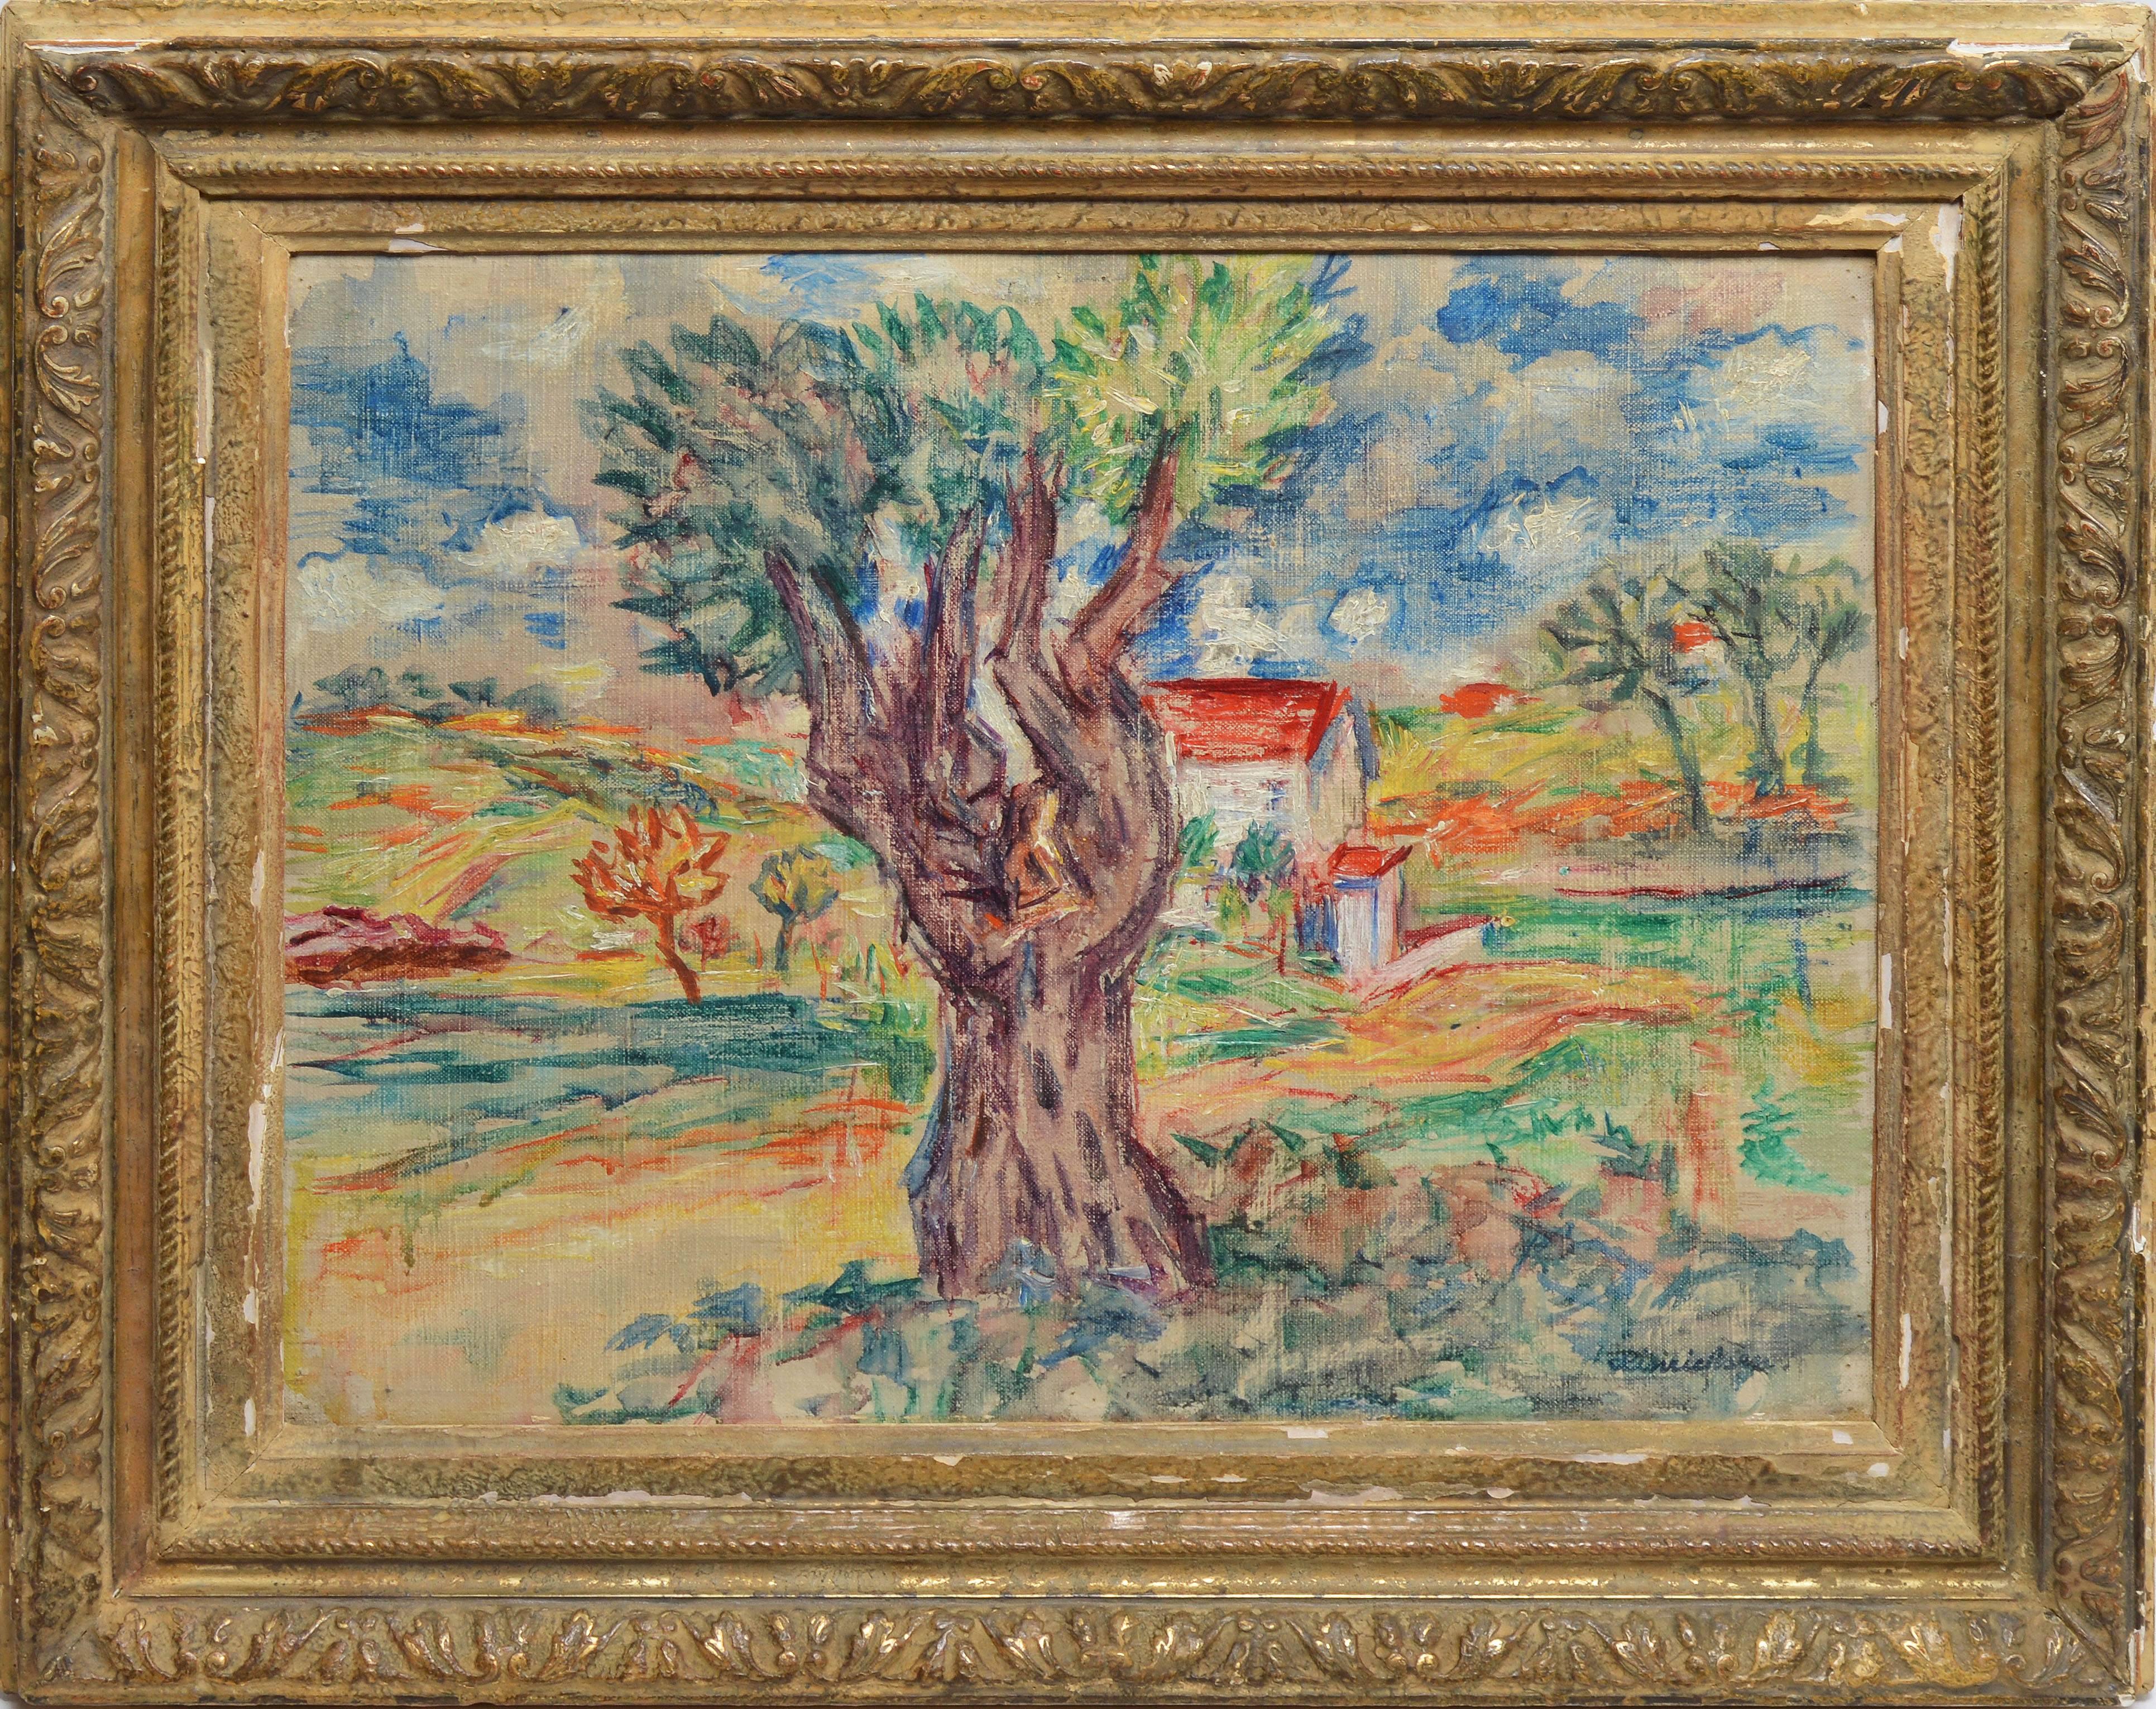 Modernist landscape by Kurt Hinrichsen (1901-1963).  Oil on board, circa 1920.  Displayed in a giltwood frame.  Image size, 16.5"L x 13.5"H, overall 21"L x 18"H.